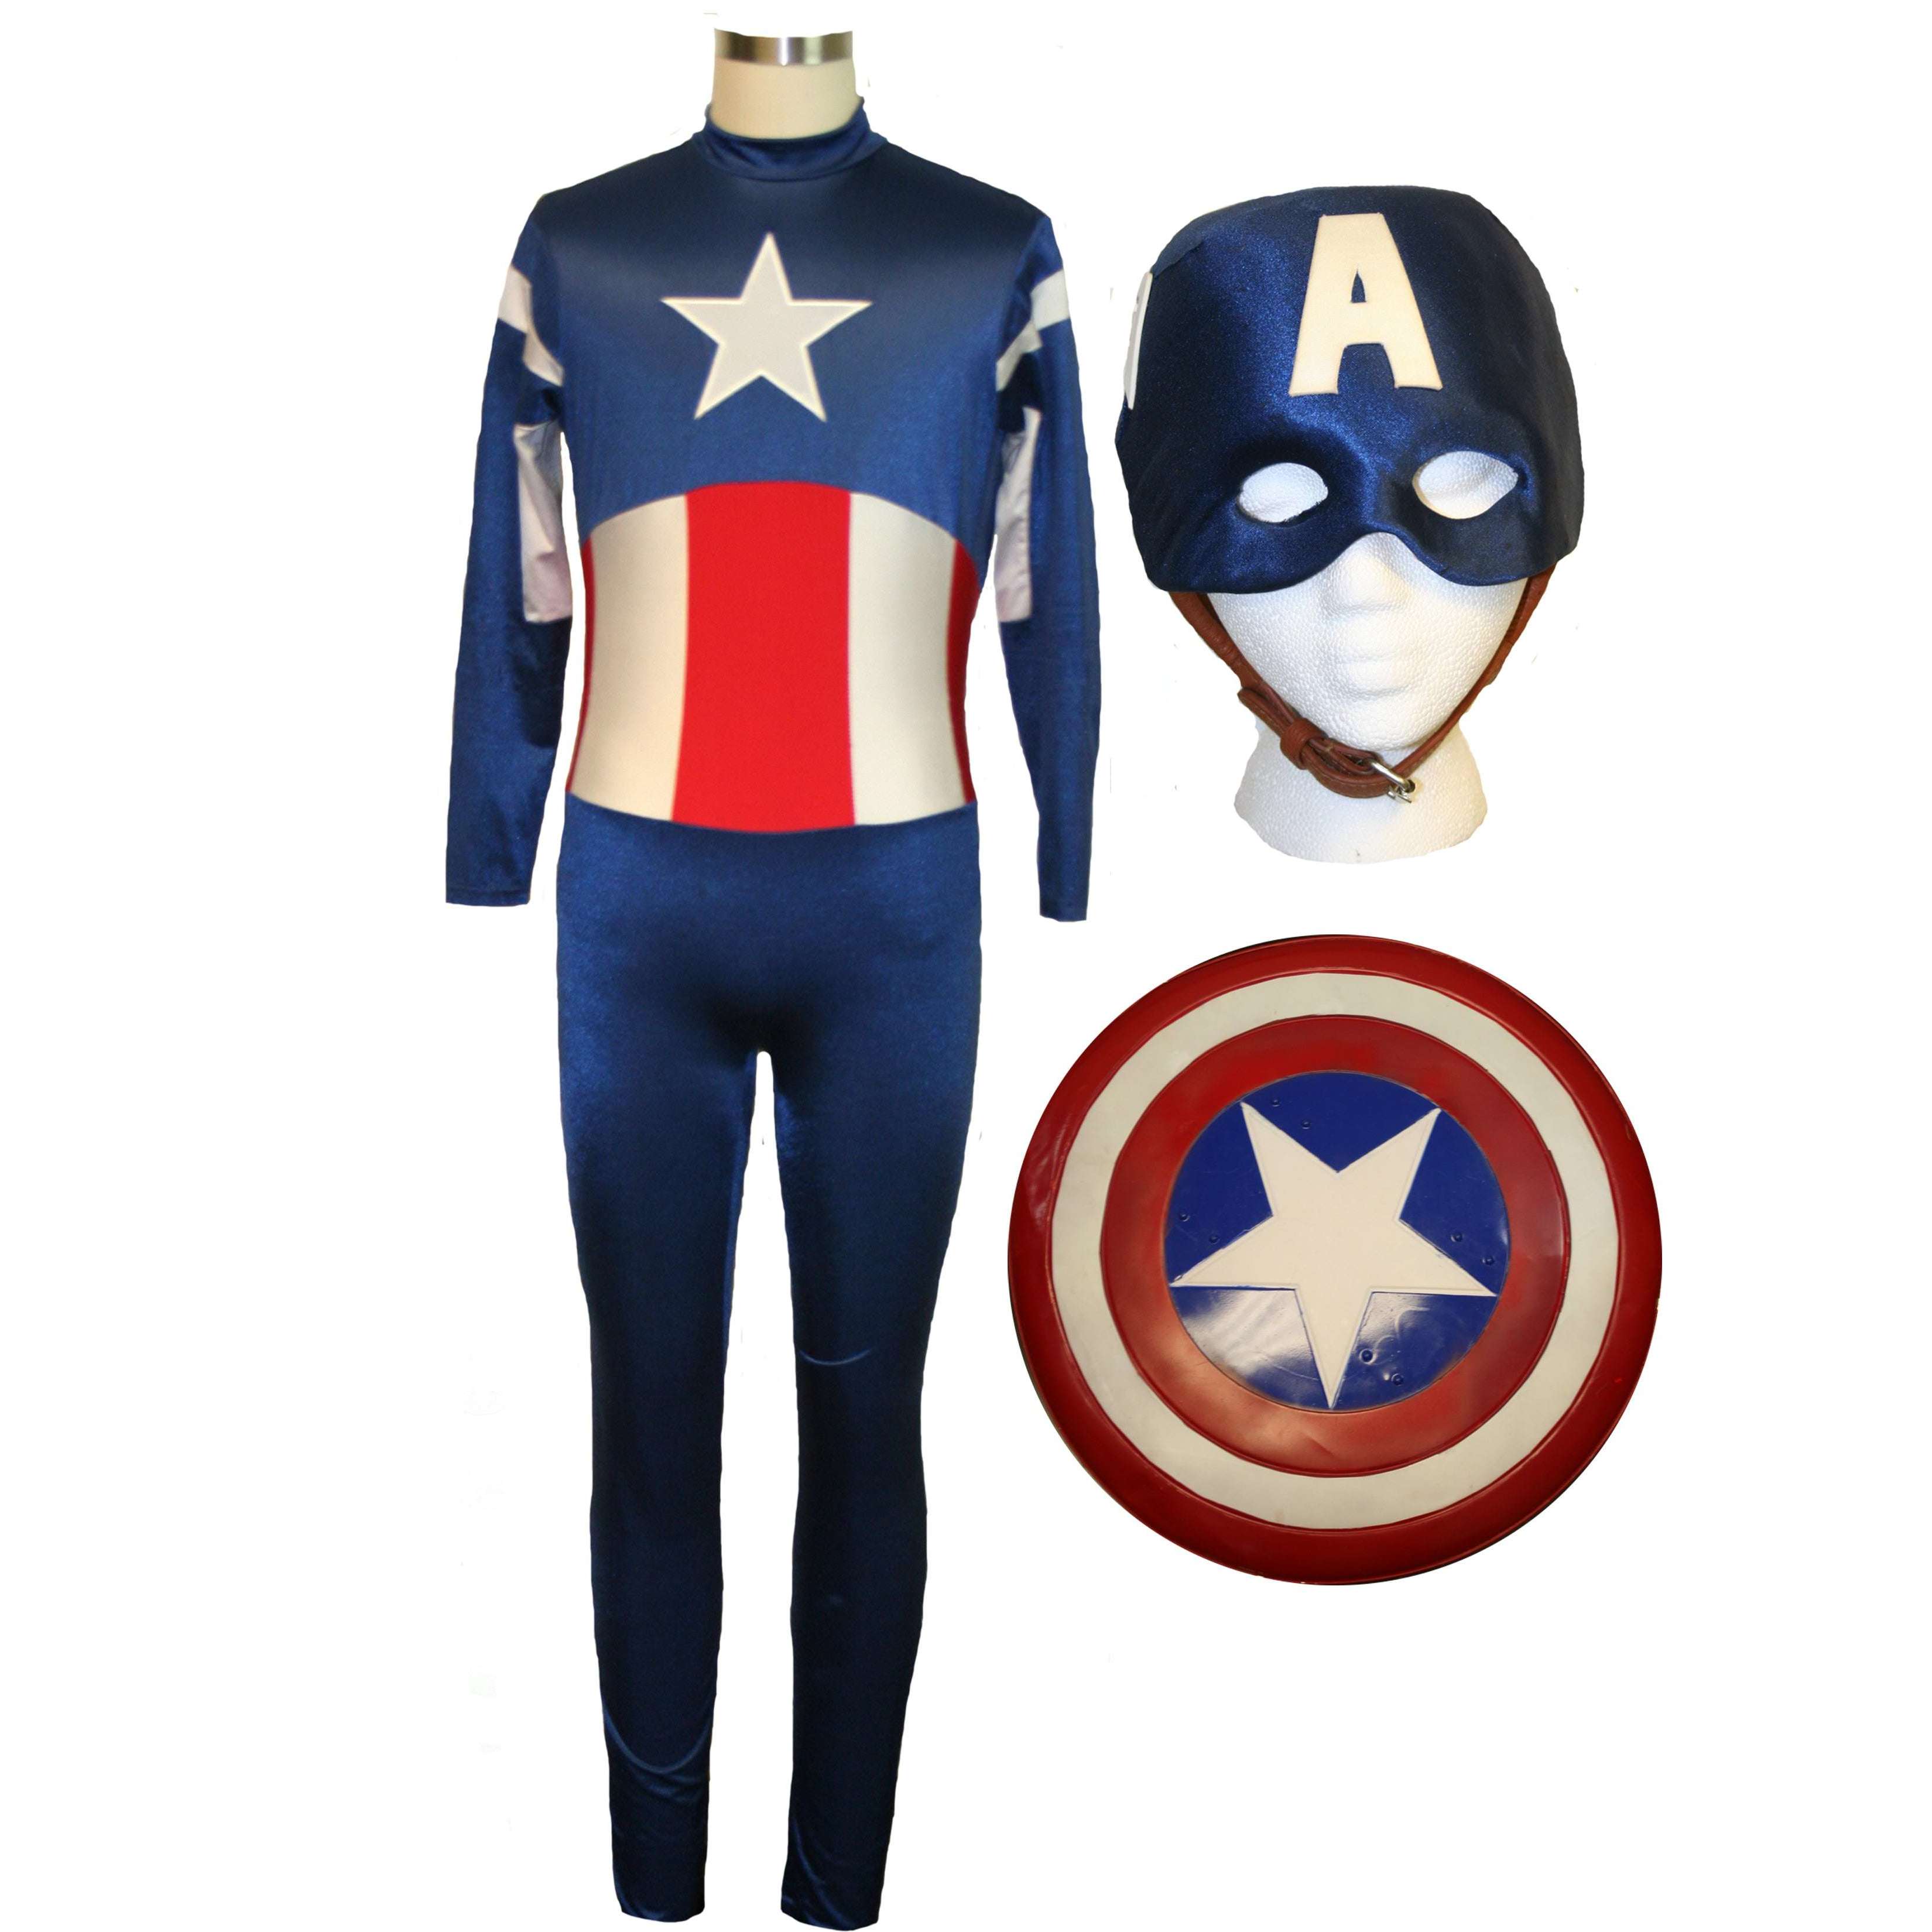 First Avenger Inspired Captain Patriotic Adult Costume w/ Jumpsuit, Helmet and Shield